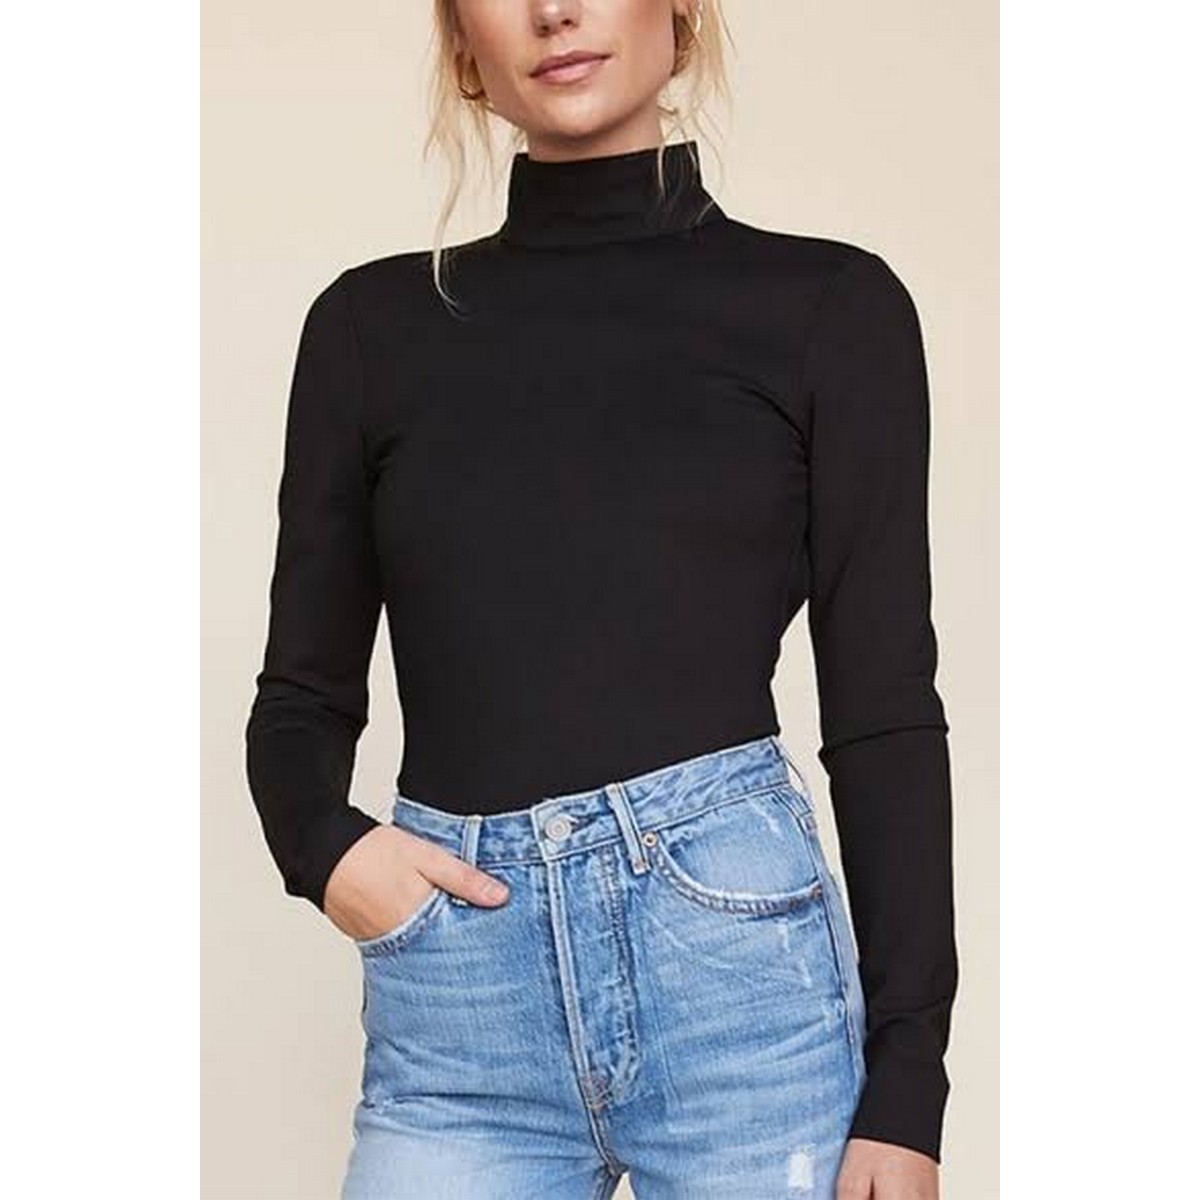 Black Turtle Neck For Women Price in Pakistan - View Latest Collection ...